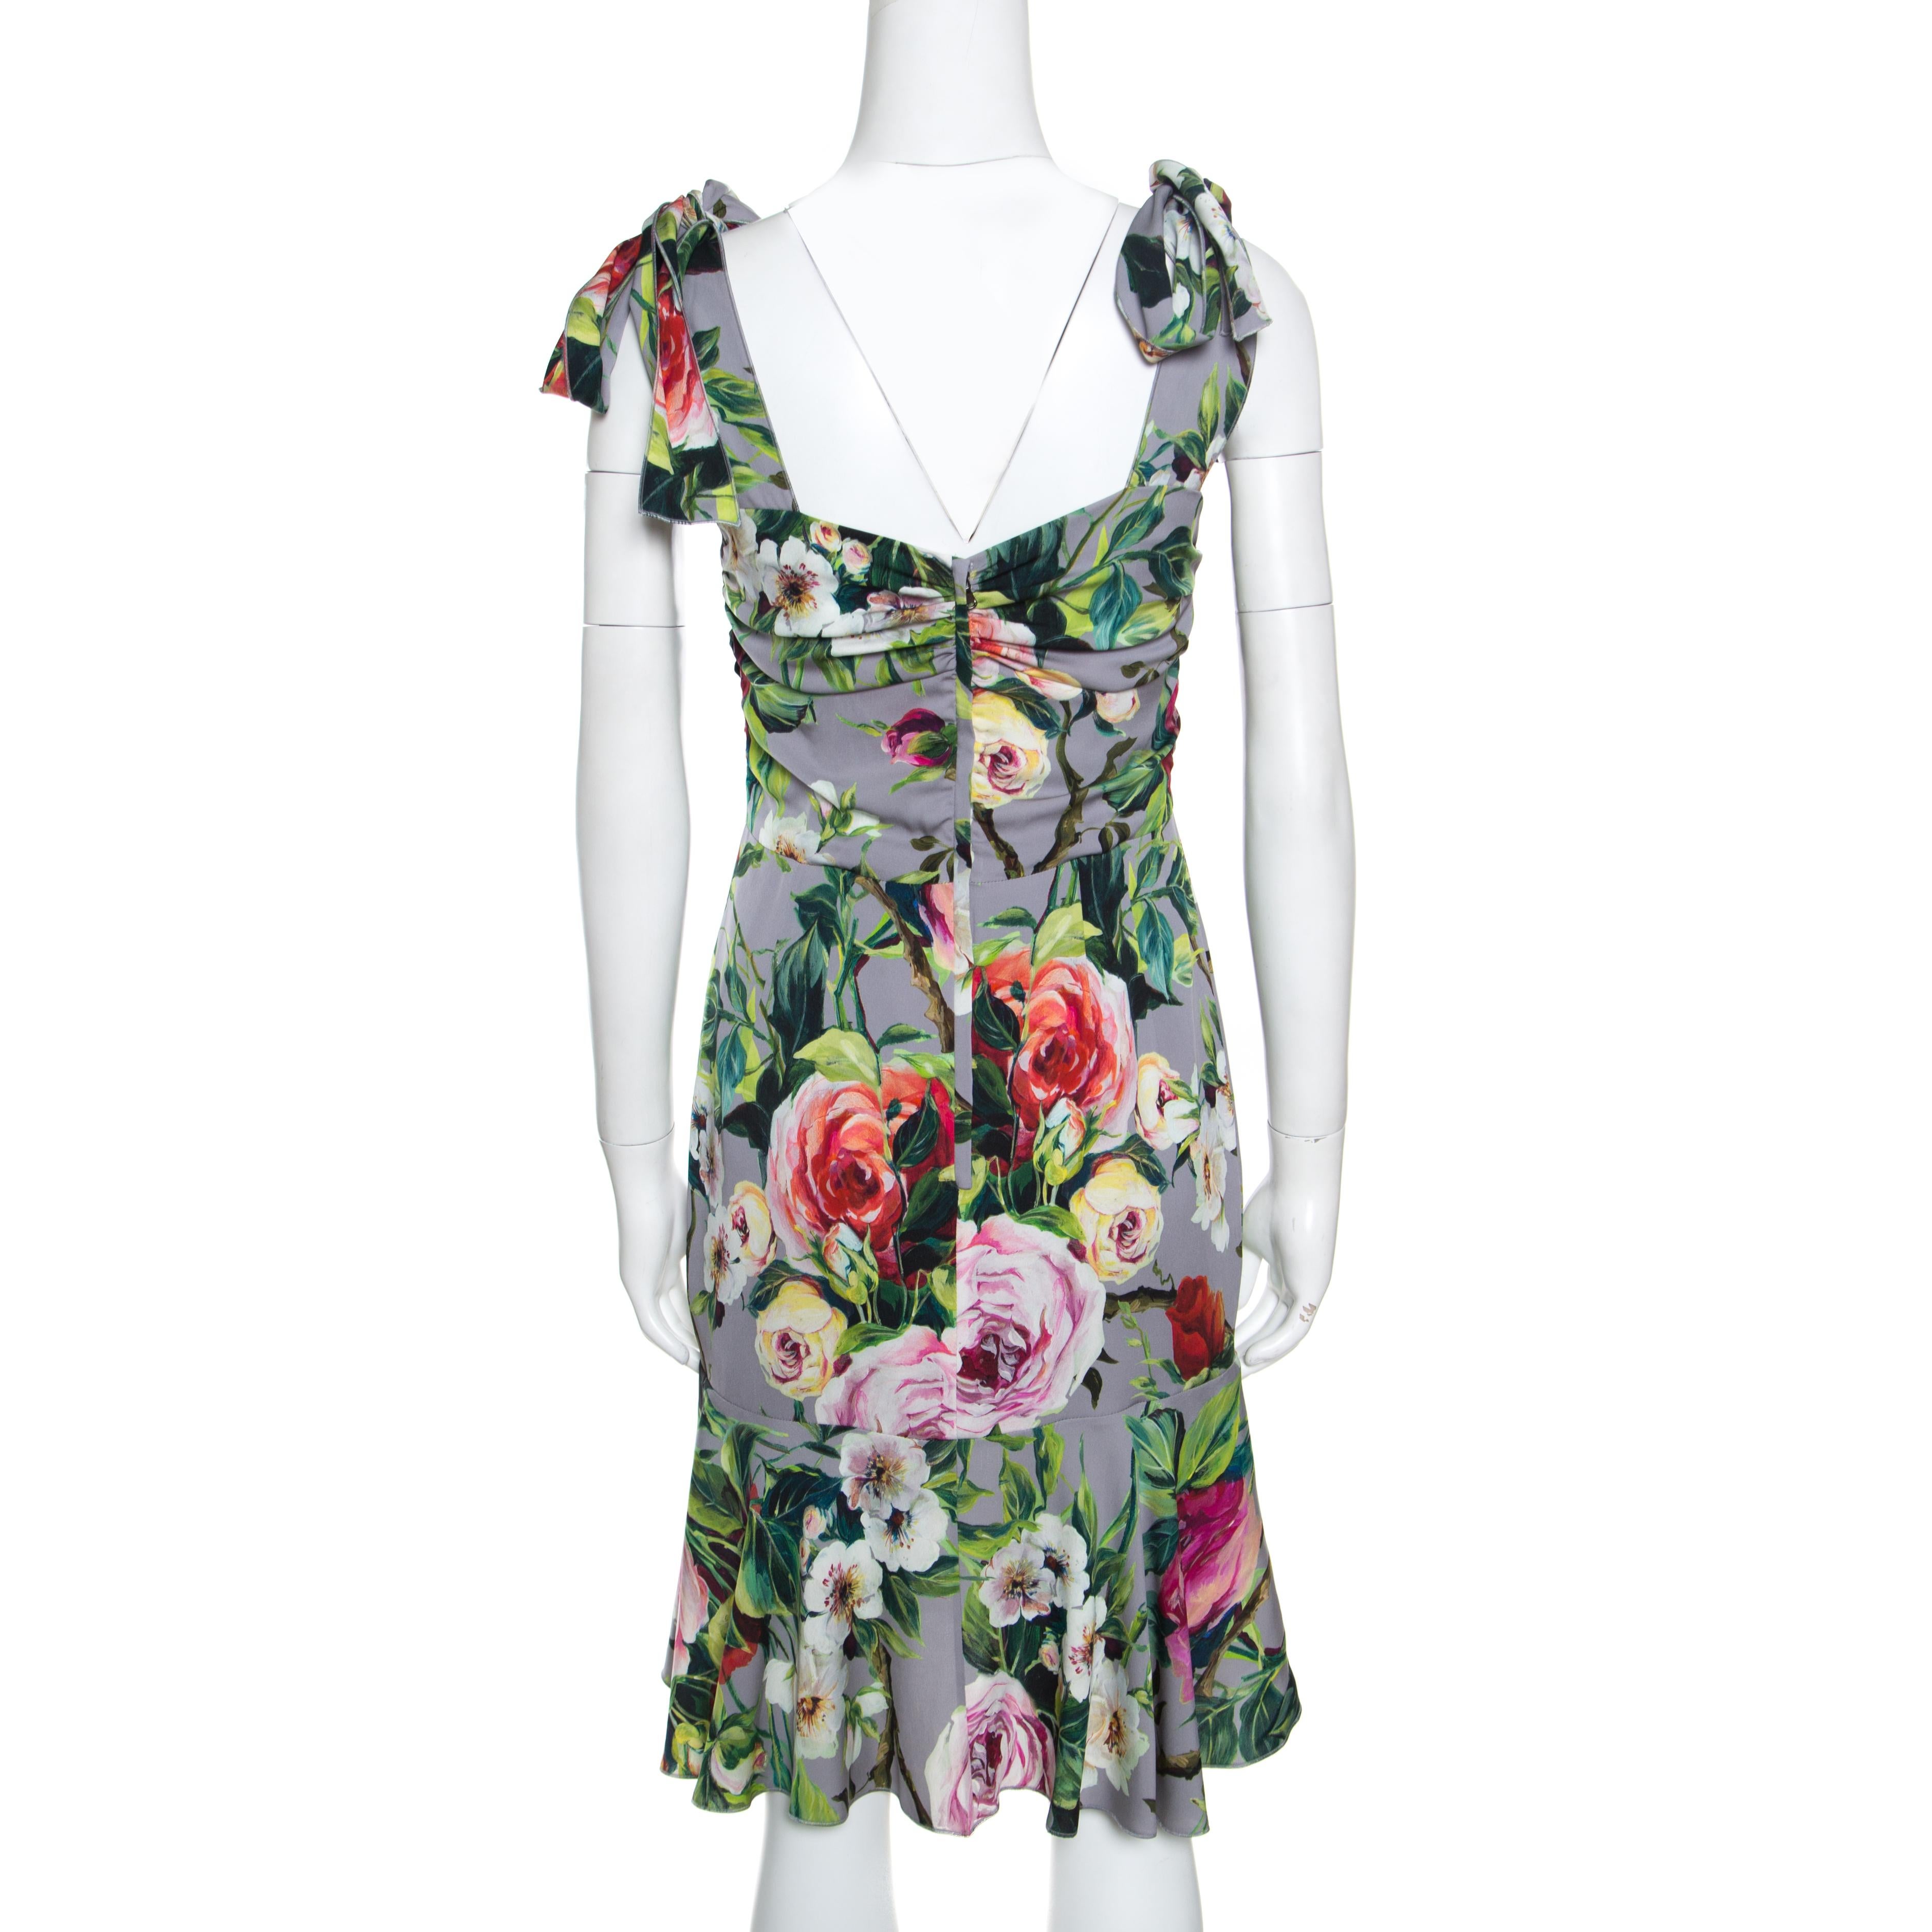 A favourite when it comes to most chic, feminine and stylish creations, Dolce and Gabbana is here to charm us yet again with this sleeveless dress! The grey dress is made of a silk blend and features a beautiful floral printed pattern all over it.